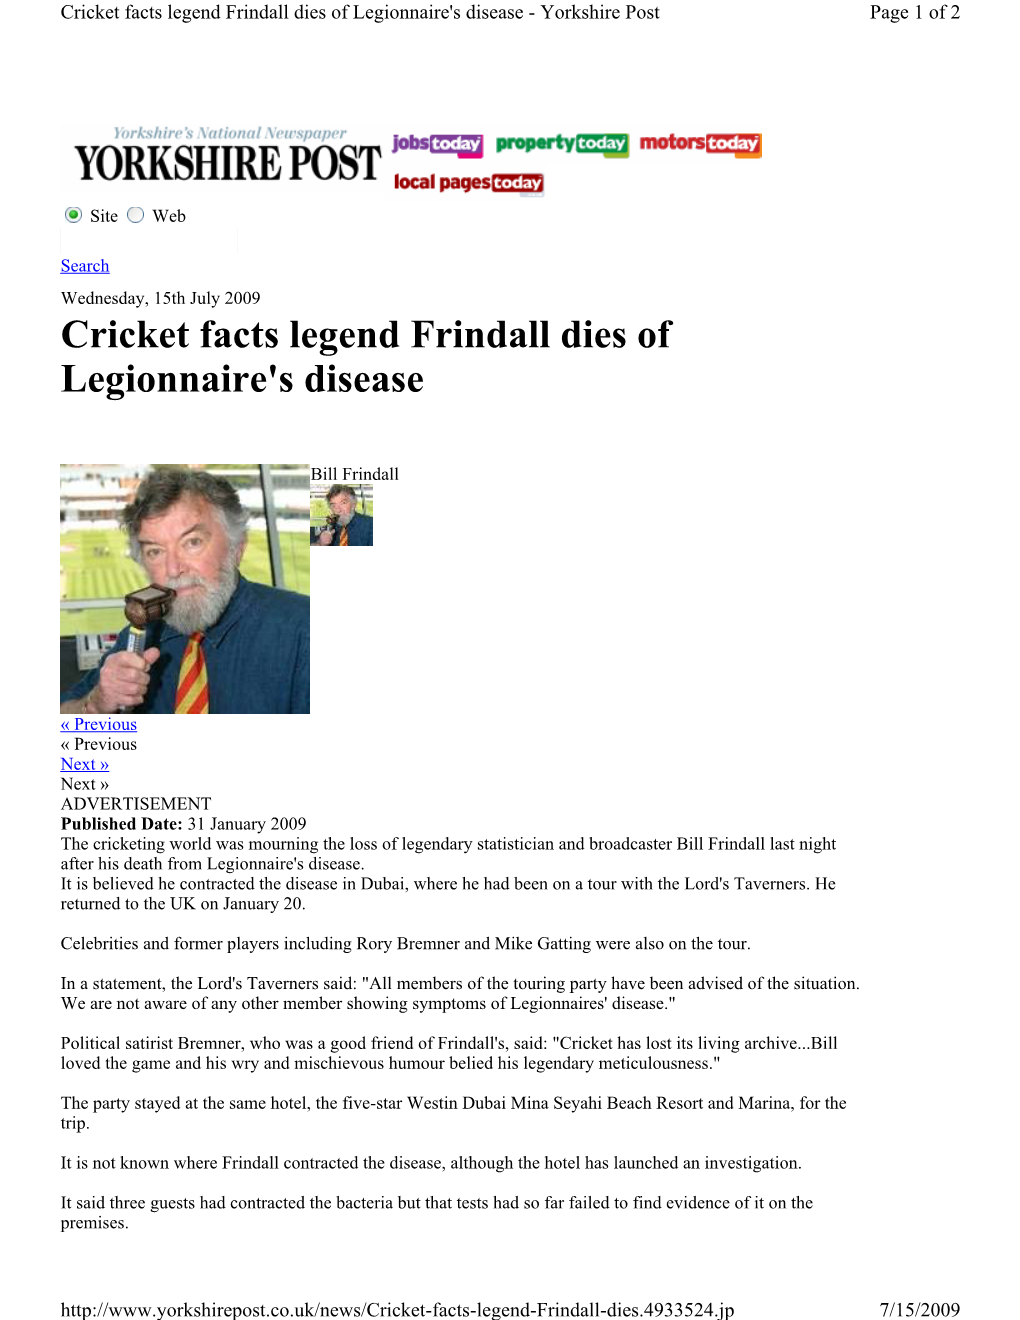 Cricket Facts Legend Frindall Dies of Legionnaire's Disease - Yorkshire Post Page 1 of 2